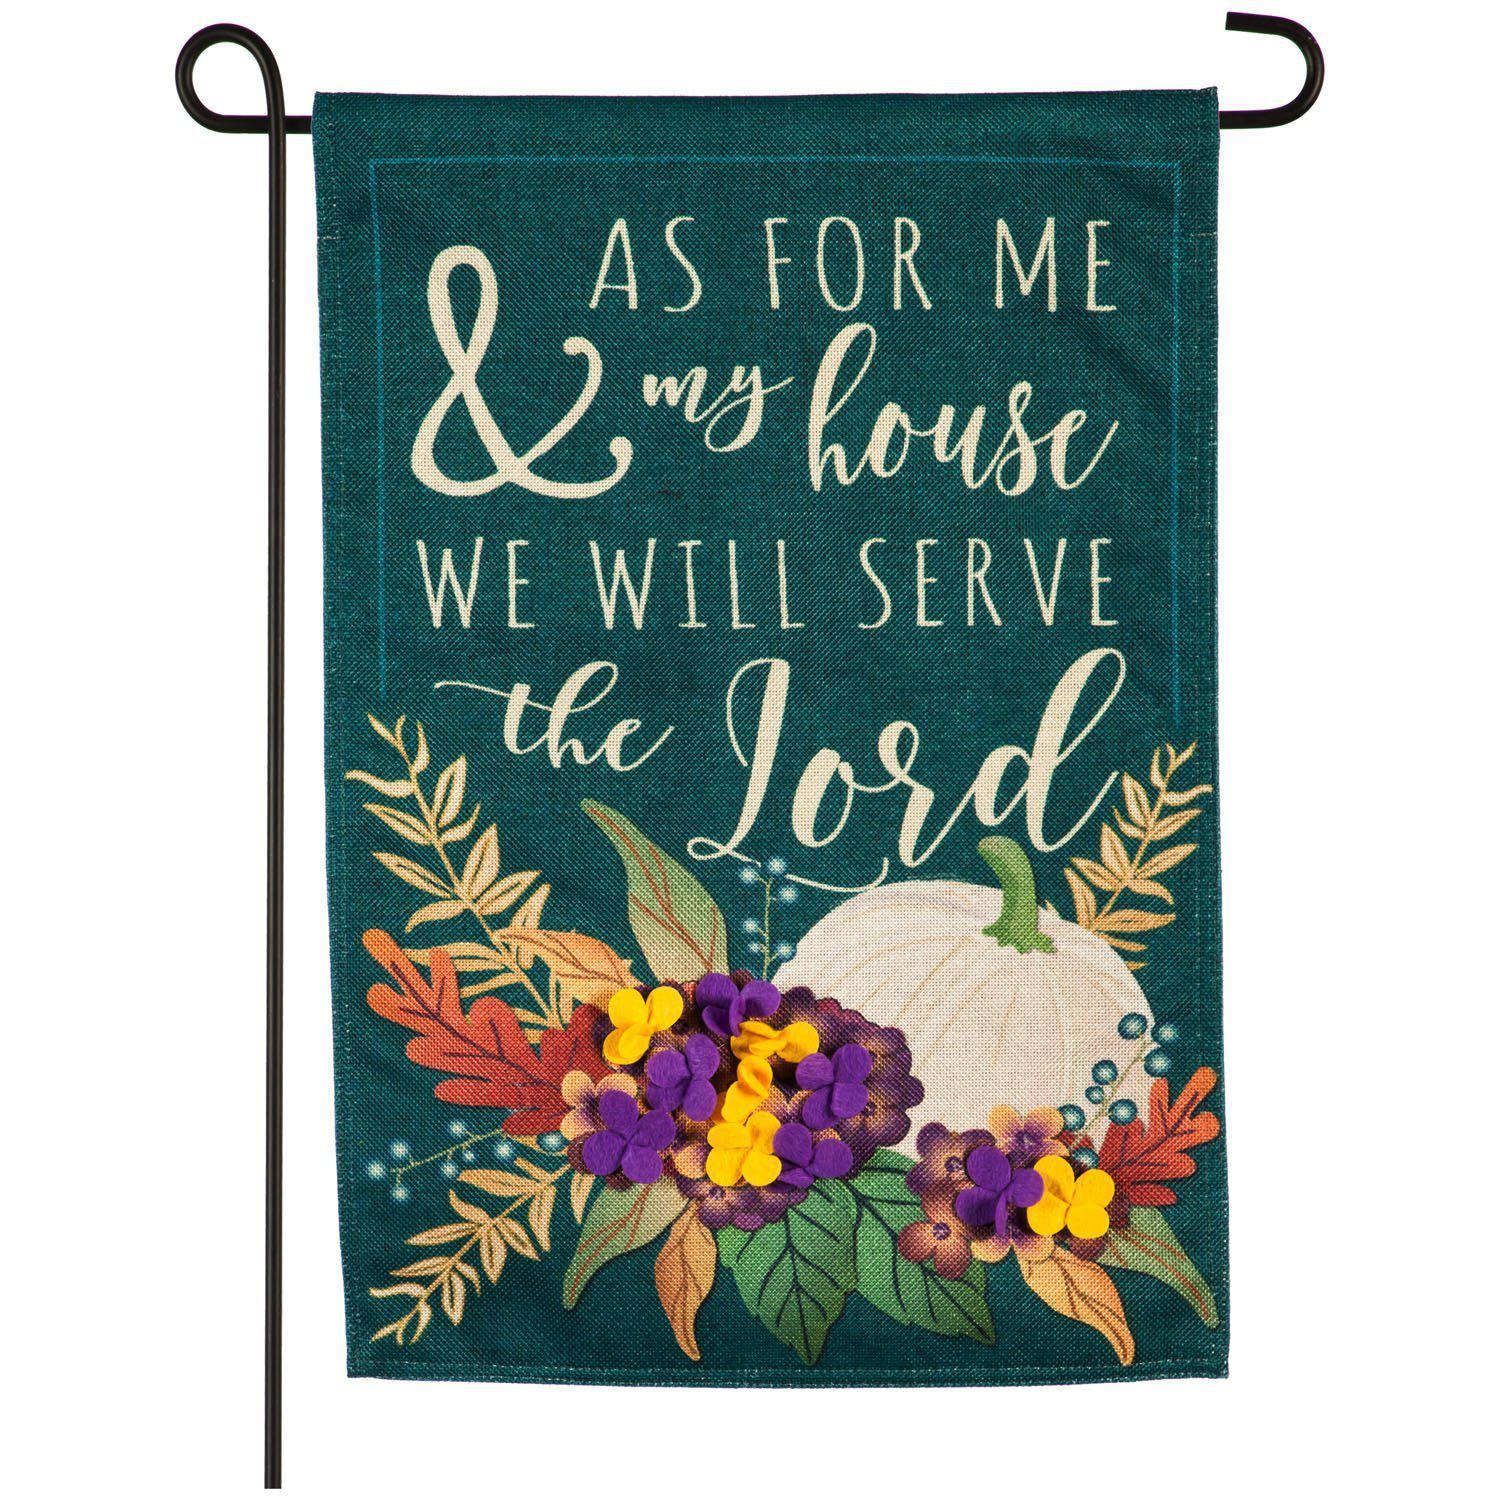 The Autumn As For Me and My House garden flag features a white pumpkin nestled among fall leaves and flowers and the words "As For Me and My House We Will Serve the Lord".